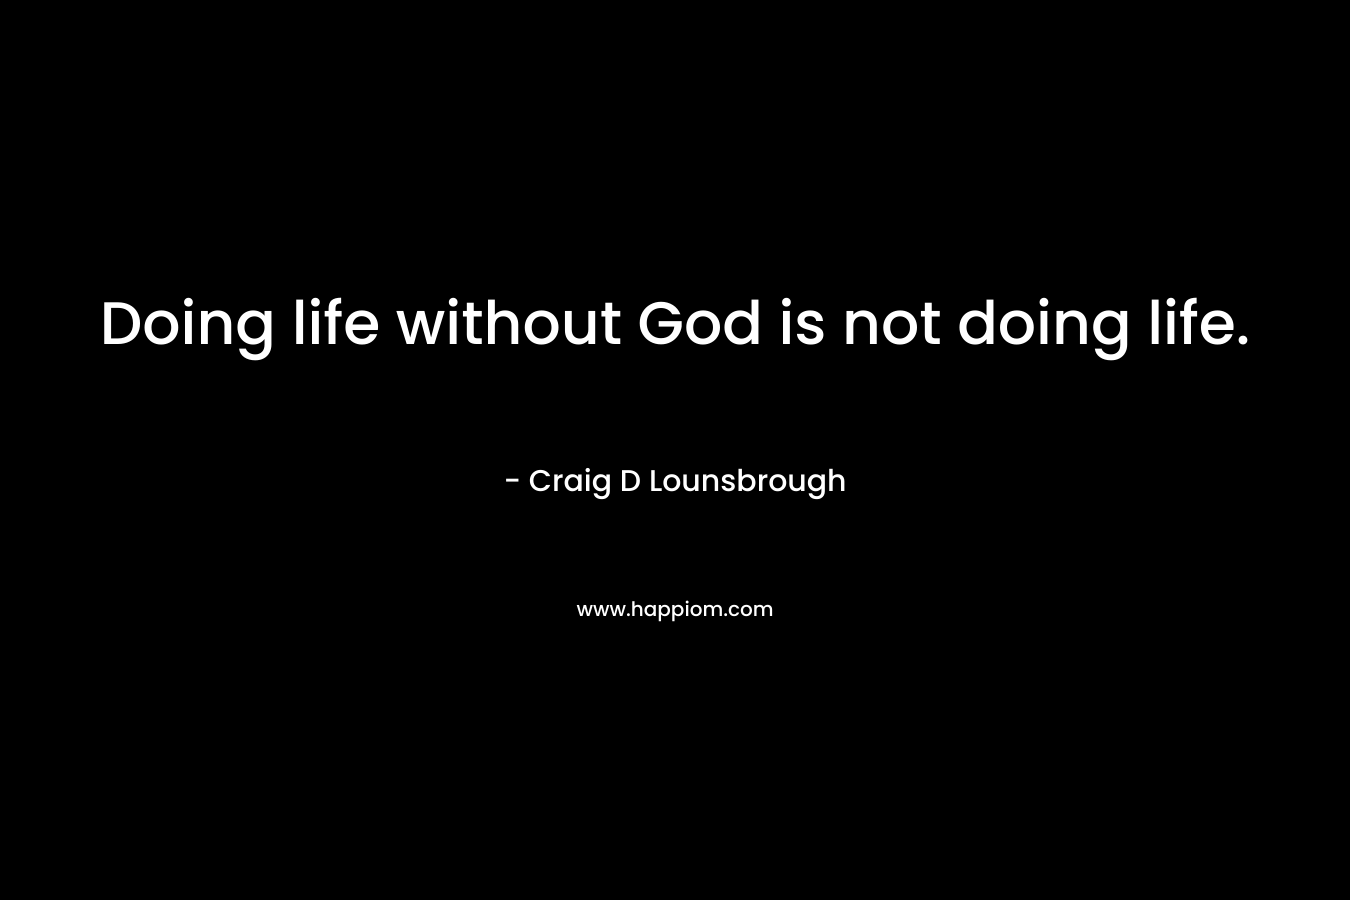 Doing life without God is not doing life.